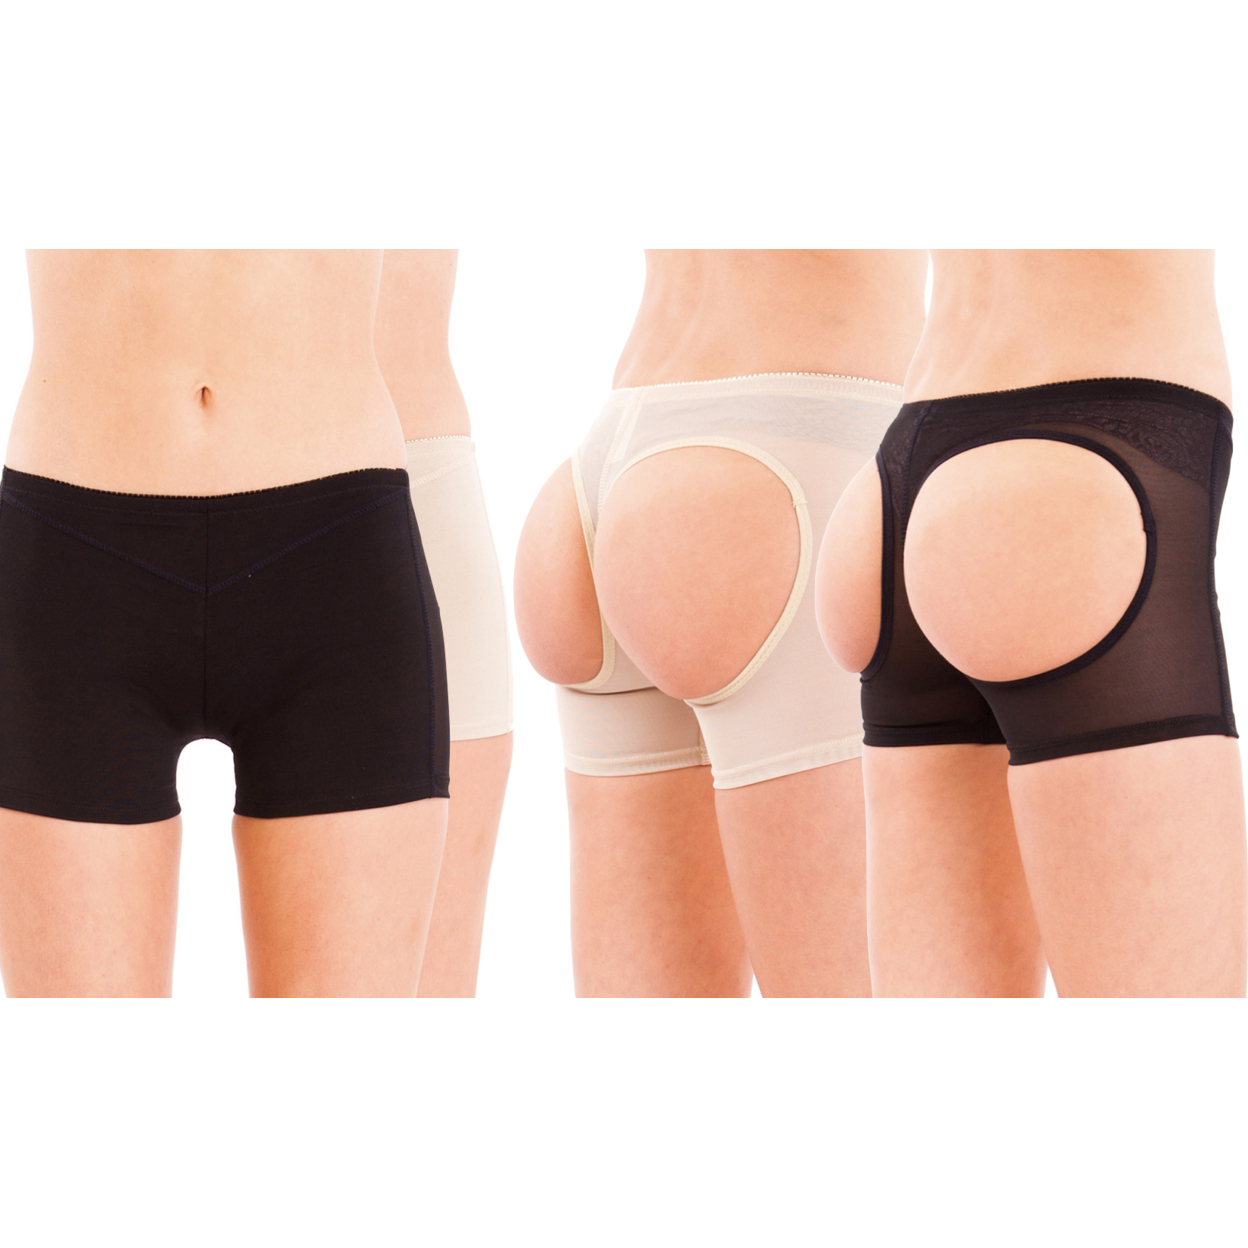 Women Tummy-Control Brief In Regular And Plus Sizes - Beige & Black, Small